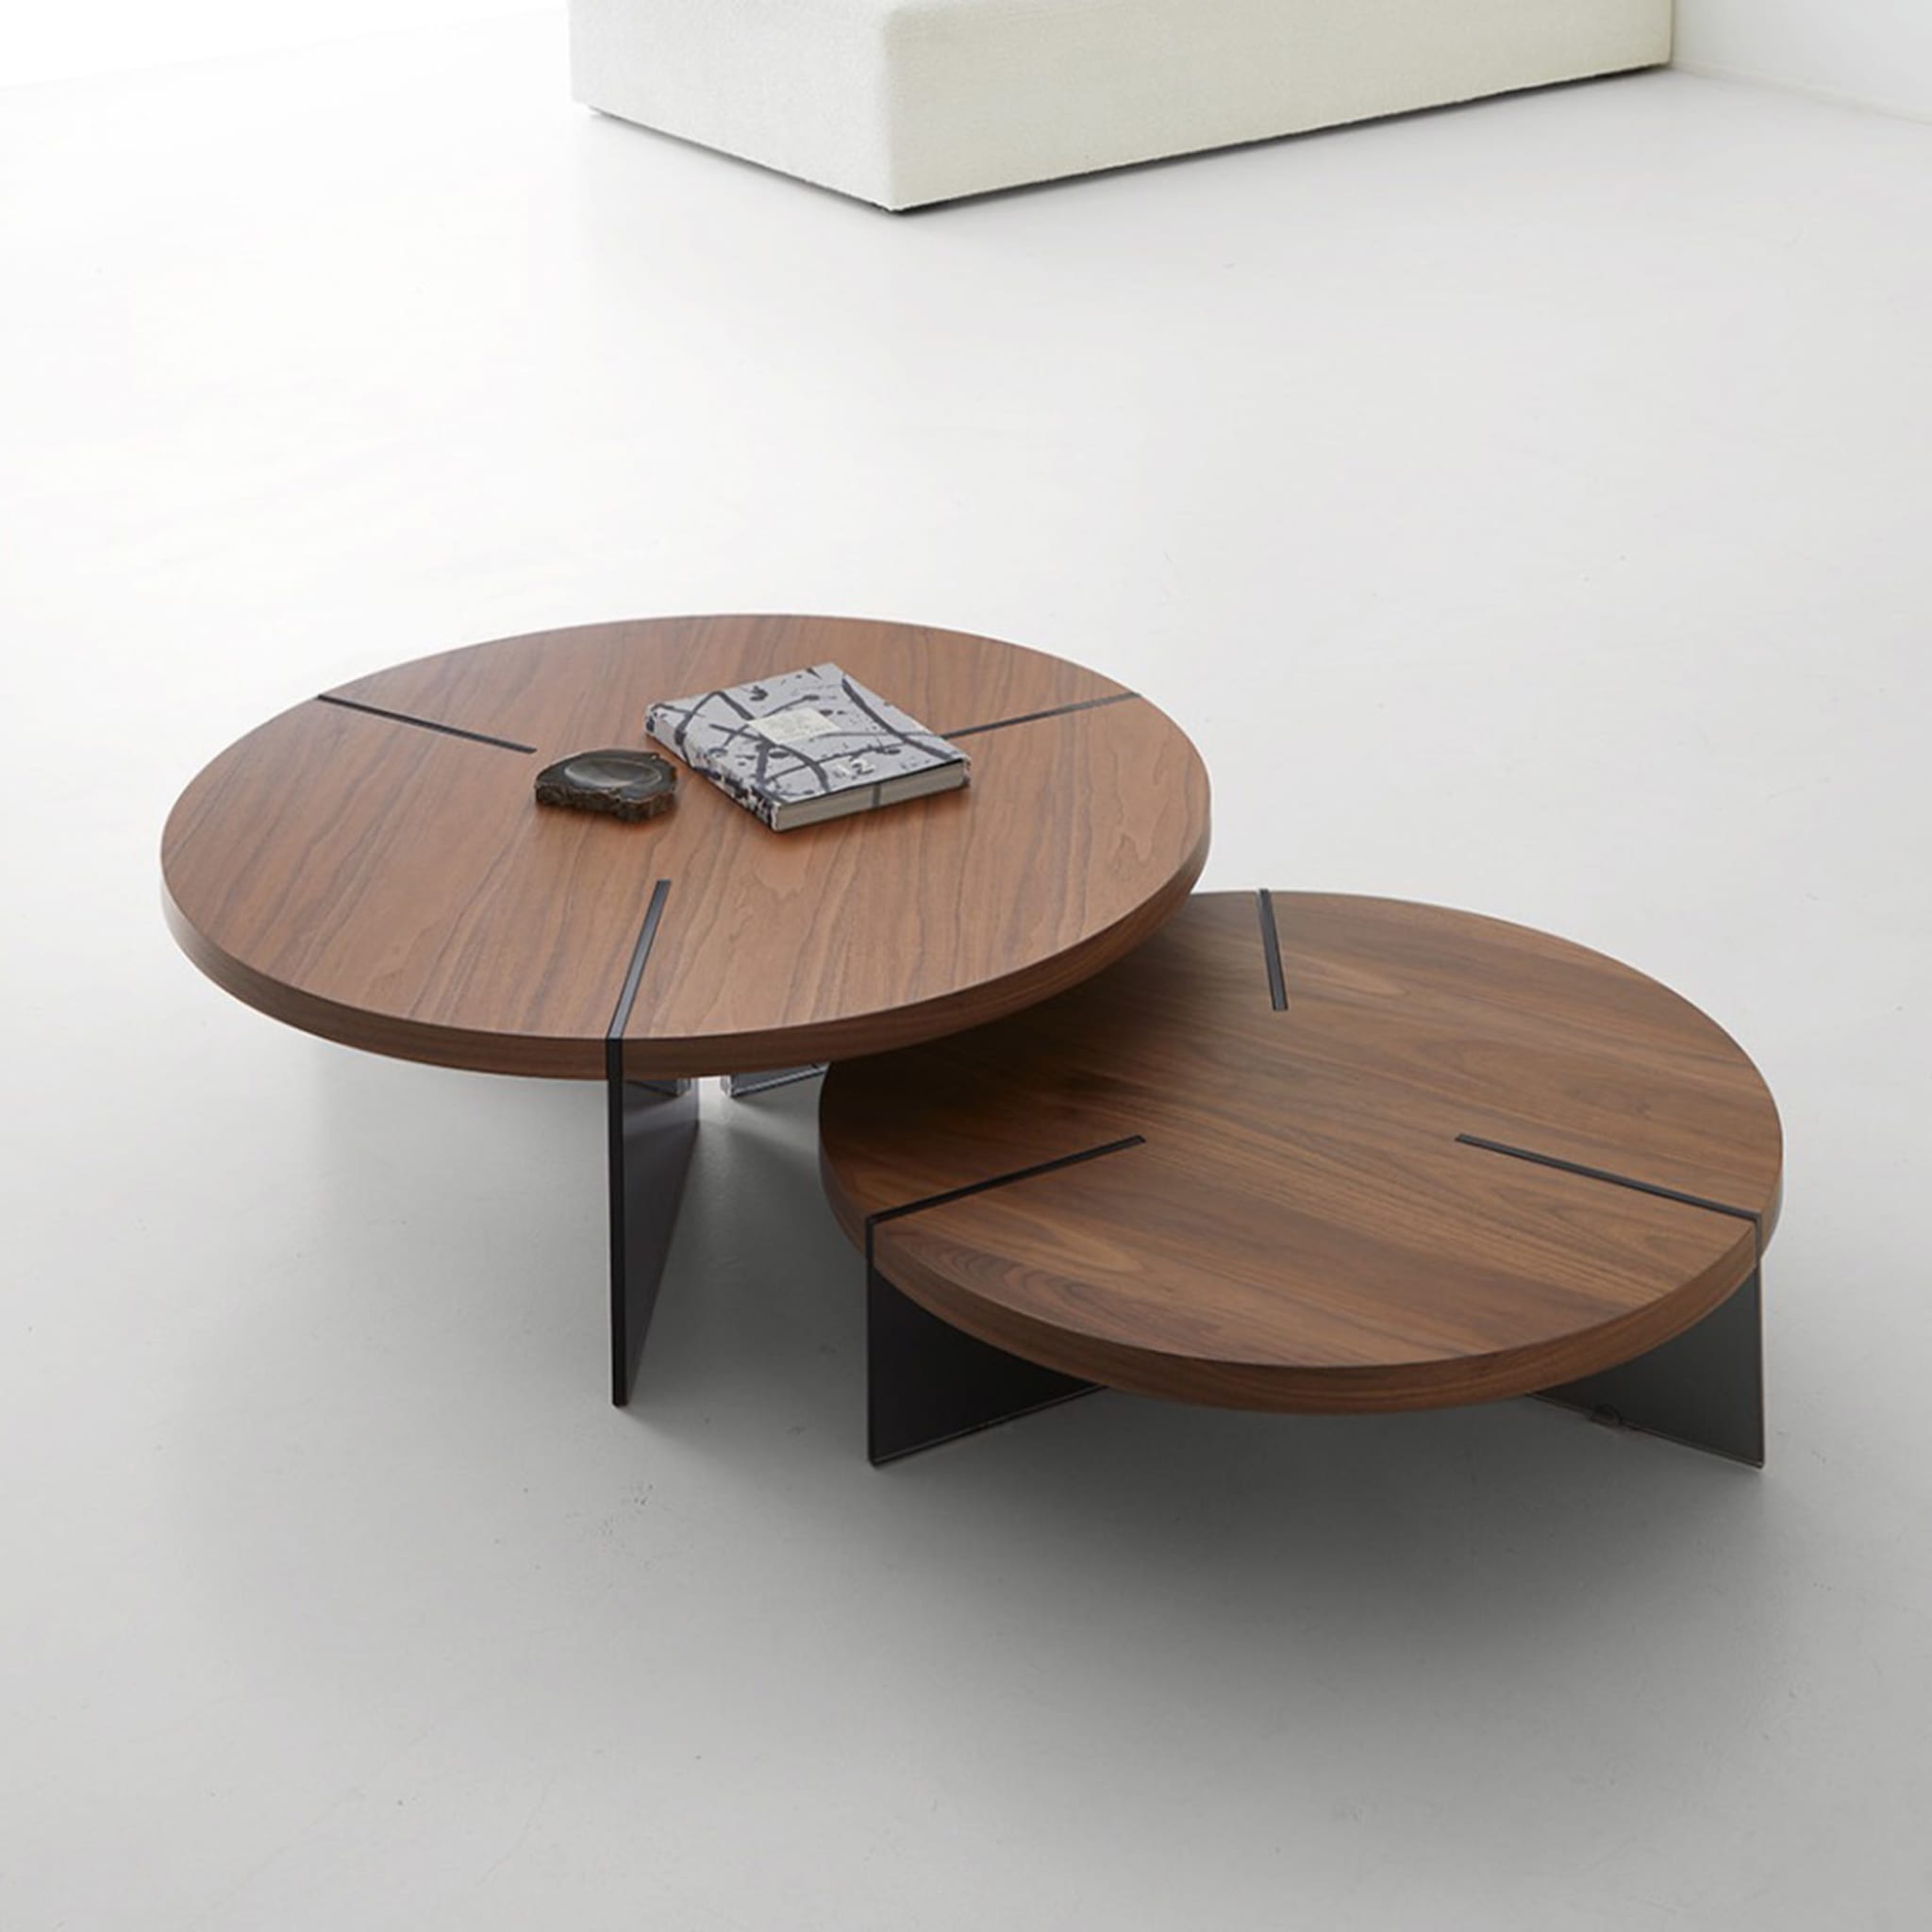 Set of 2 Work Coffee Tables - Alternative view 3